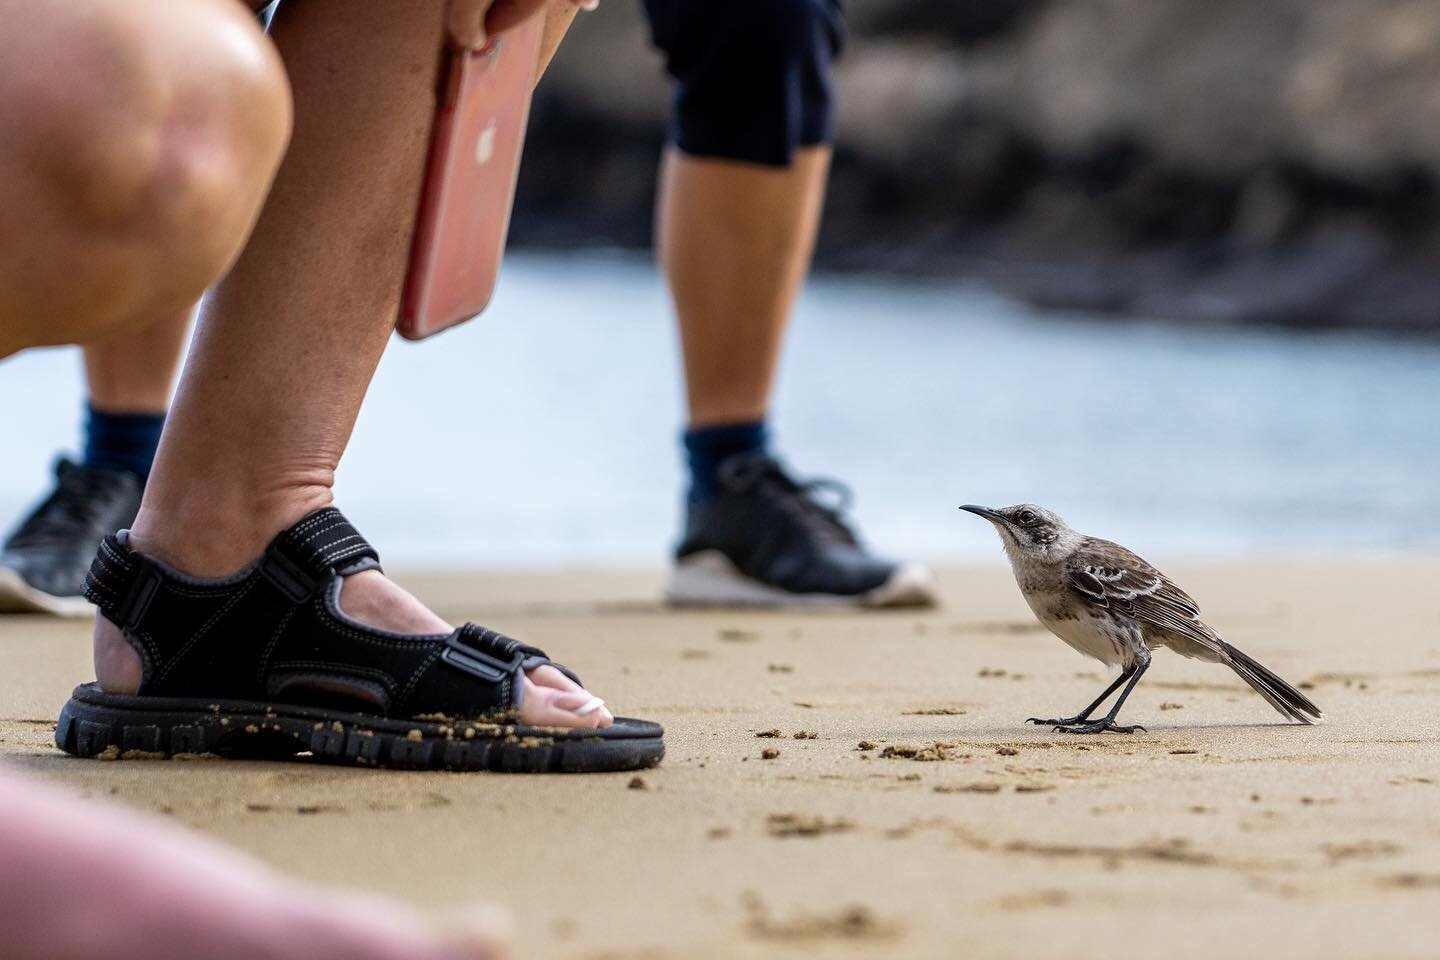 &ldquo;In a land of ancient tortoises and equatorial penguins, I fell for the humble mockingbird.&rdquo;

In my latest, I wrote about just how much the Gal&aacute;pagos Islands can teach us, not just about the natural world and how to protect what&rs